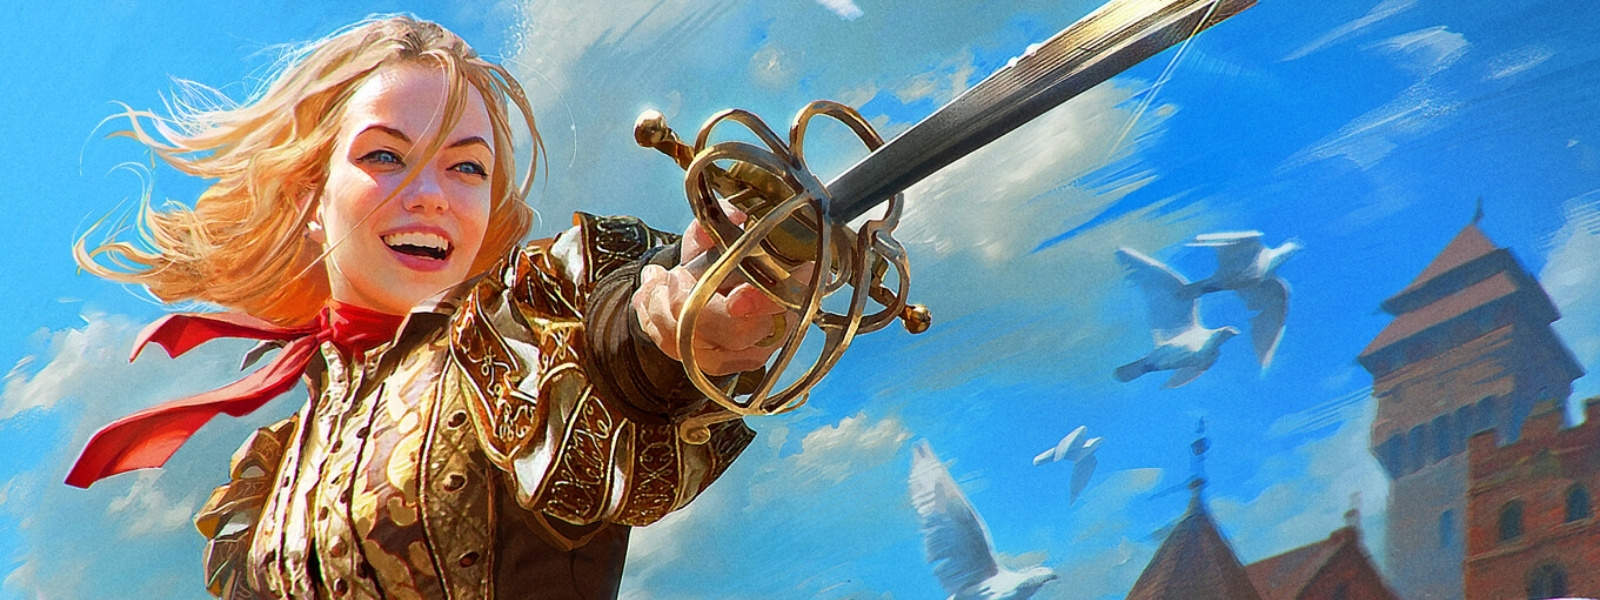 Swashbuckler Rogue Guide 5e: Charming, Dangerous, With Style